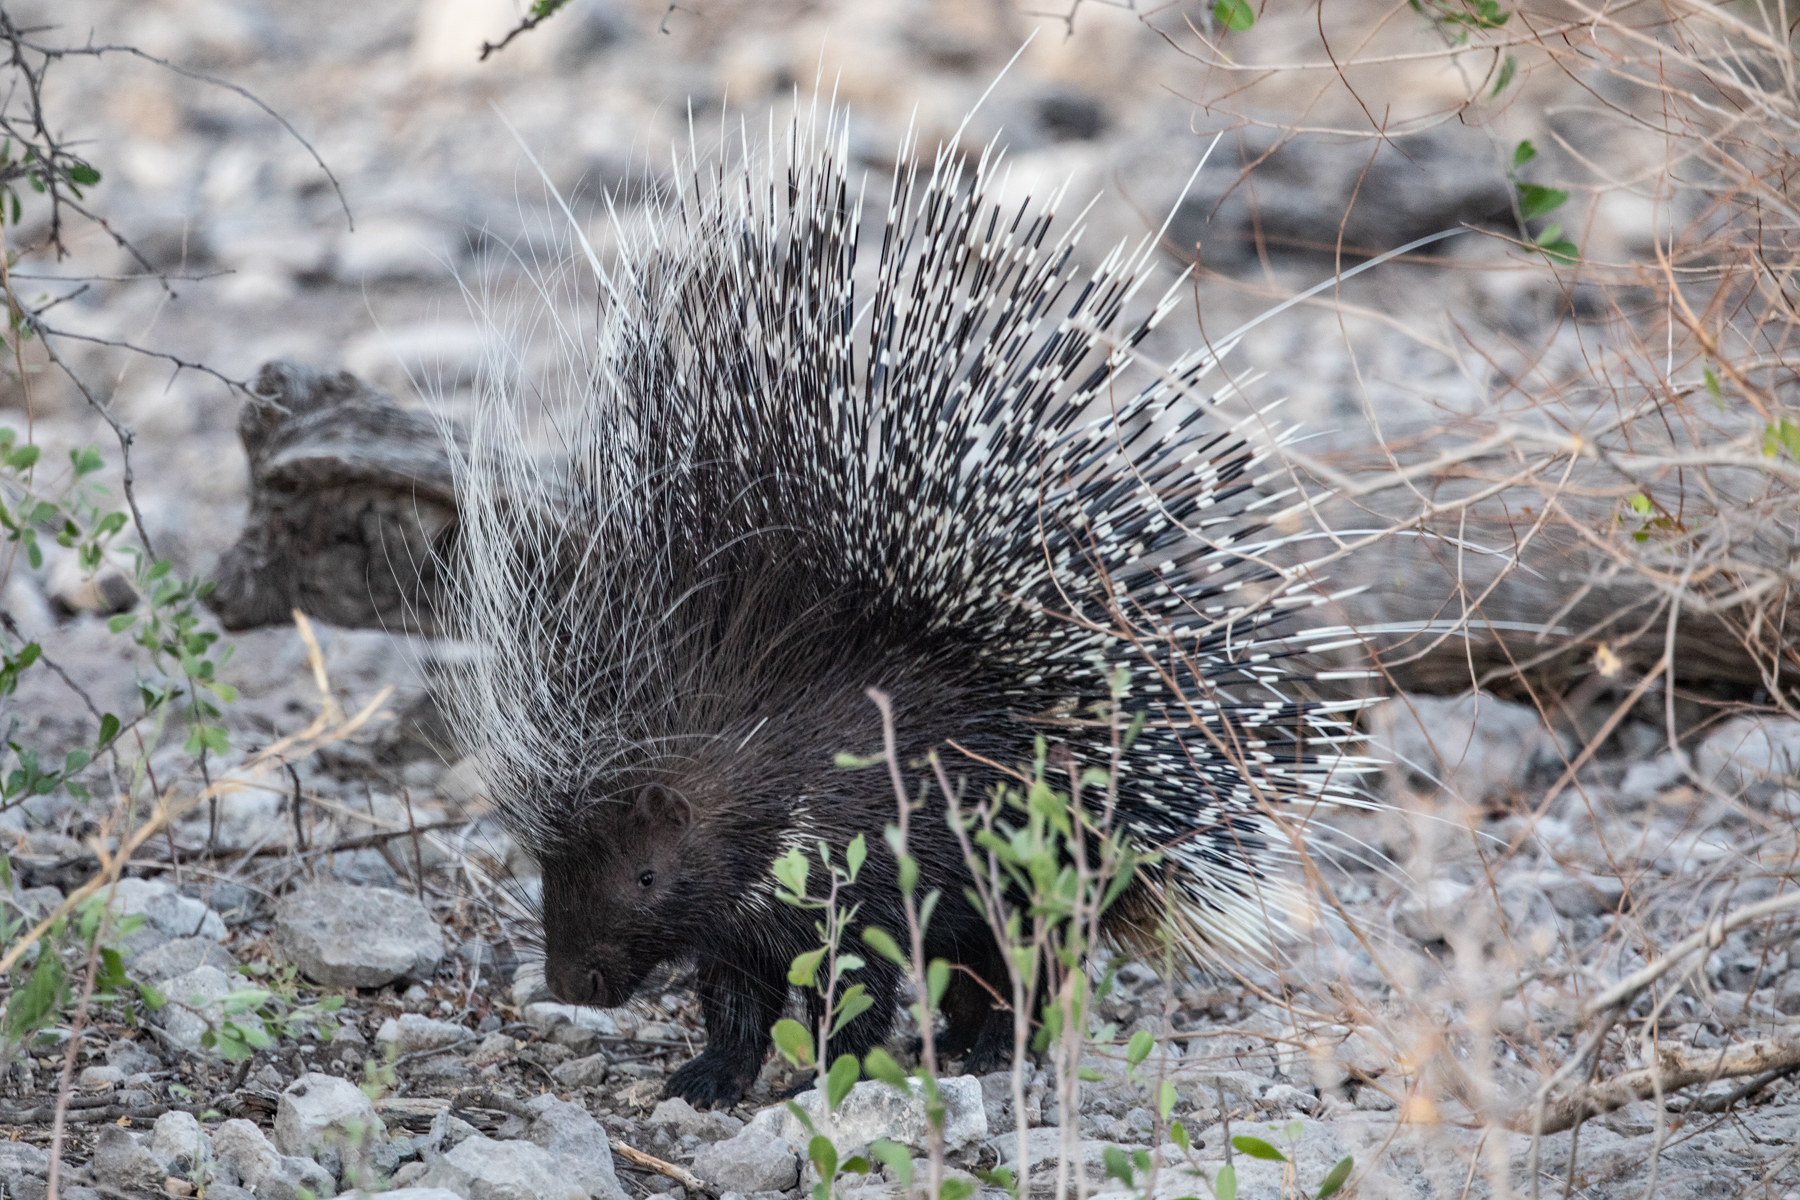 A rare sighting of a Porcupine in Etosha close to sunset.